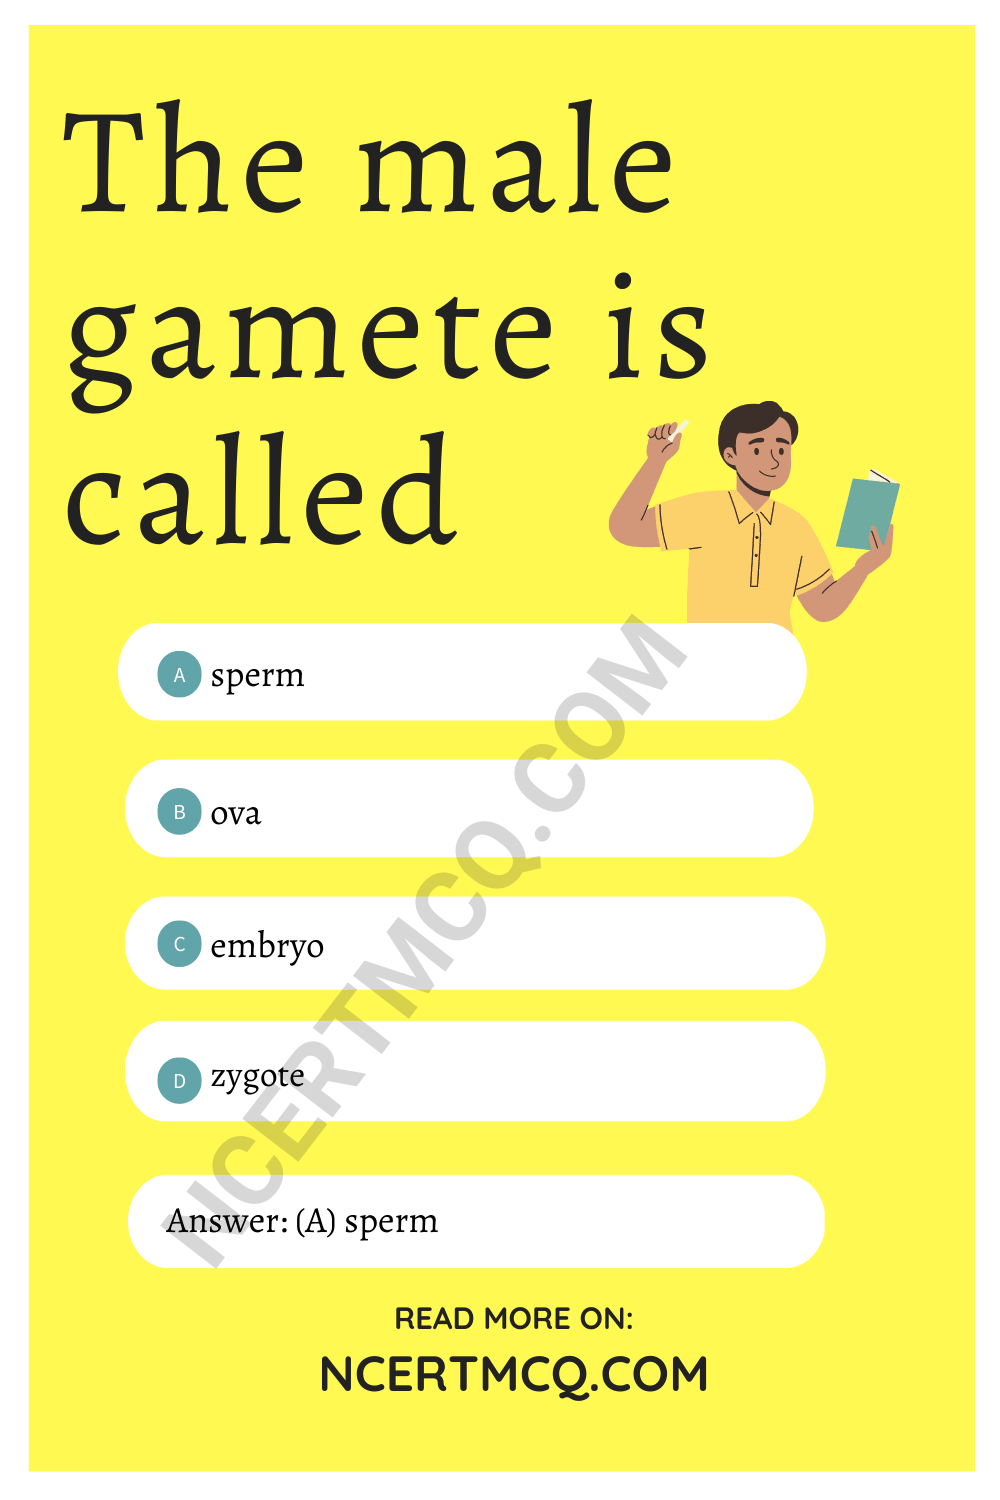 The male gamete is called